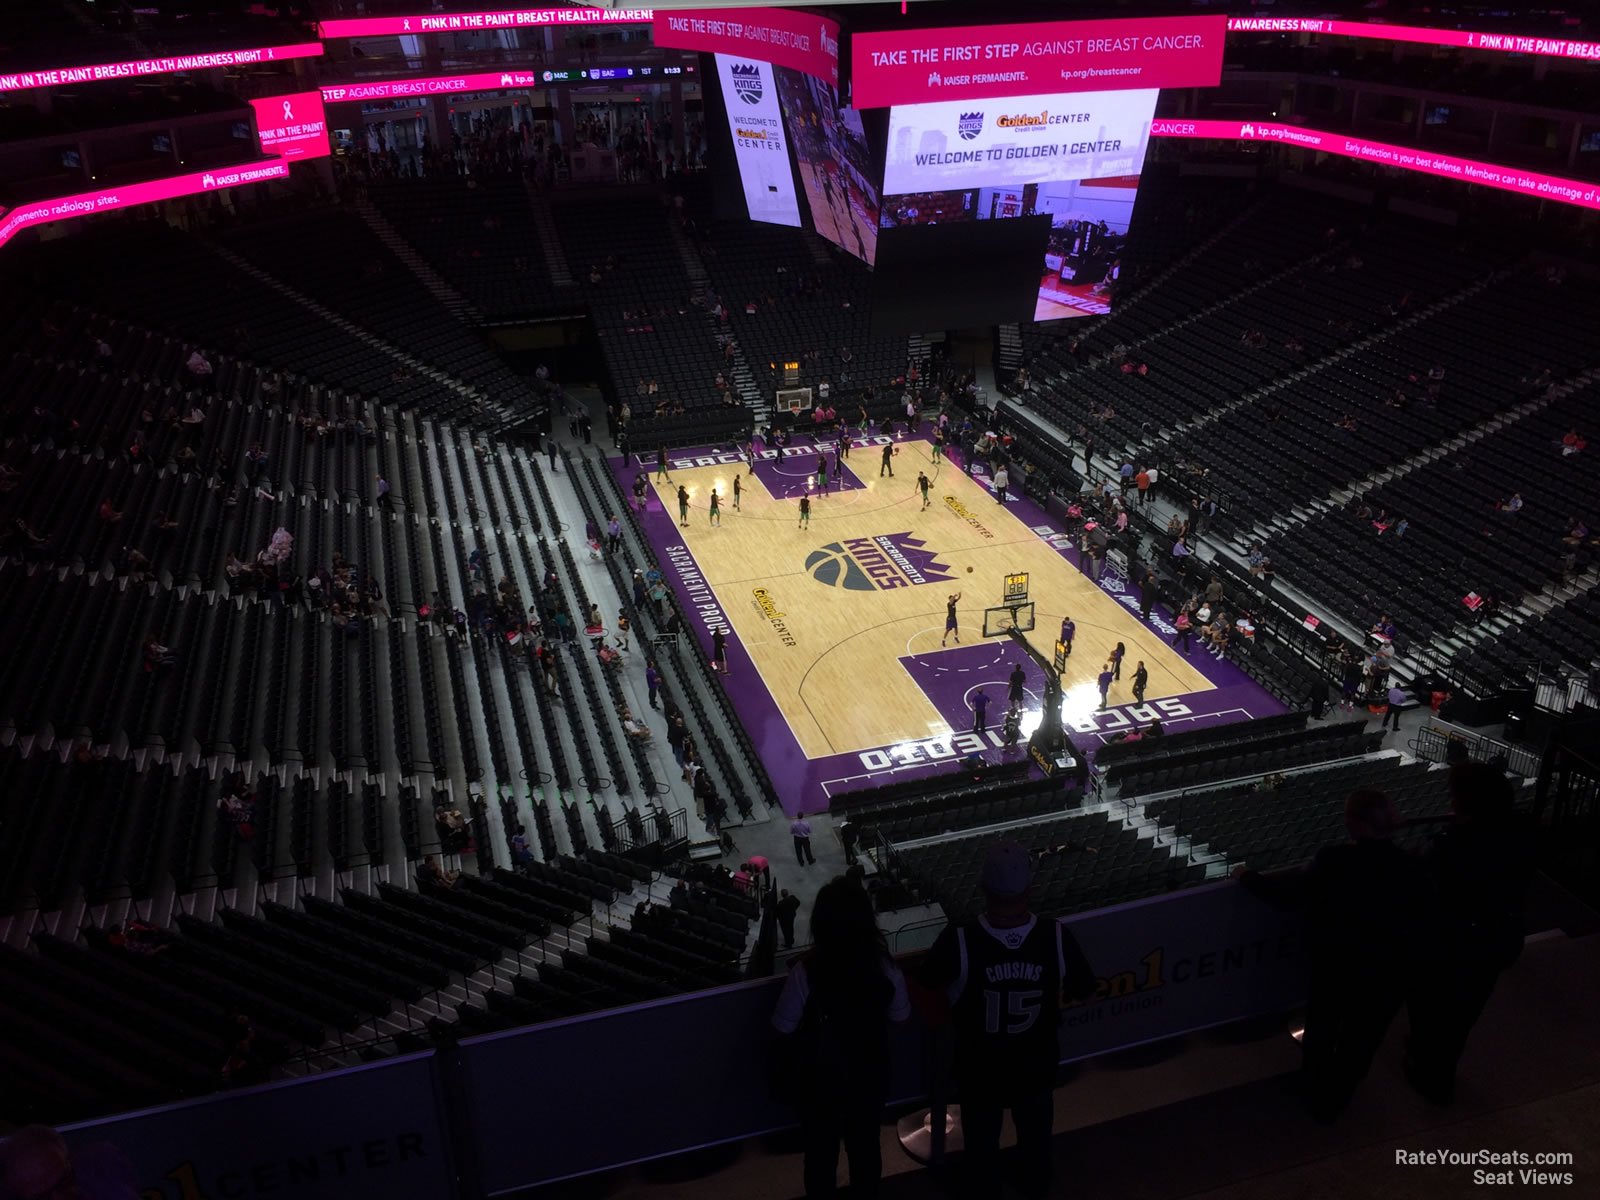 section 213, row h seat view  for basketball - golden 1 center